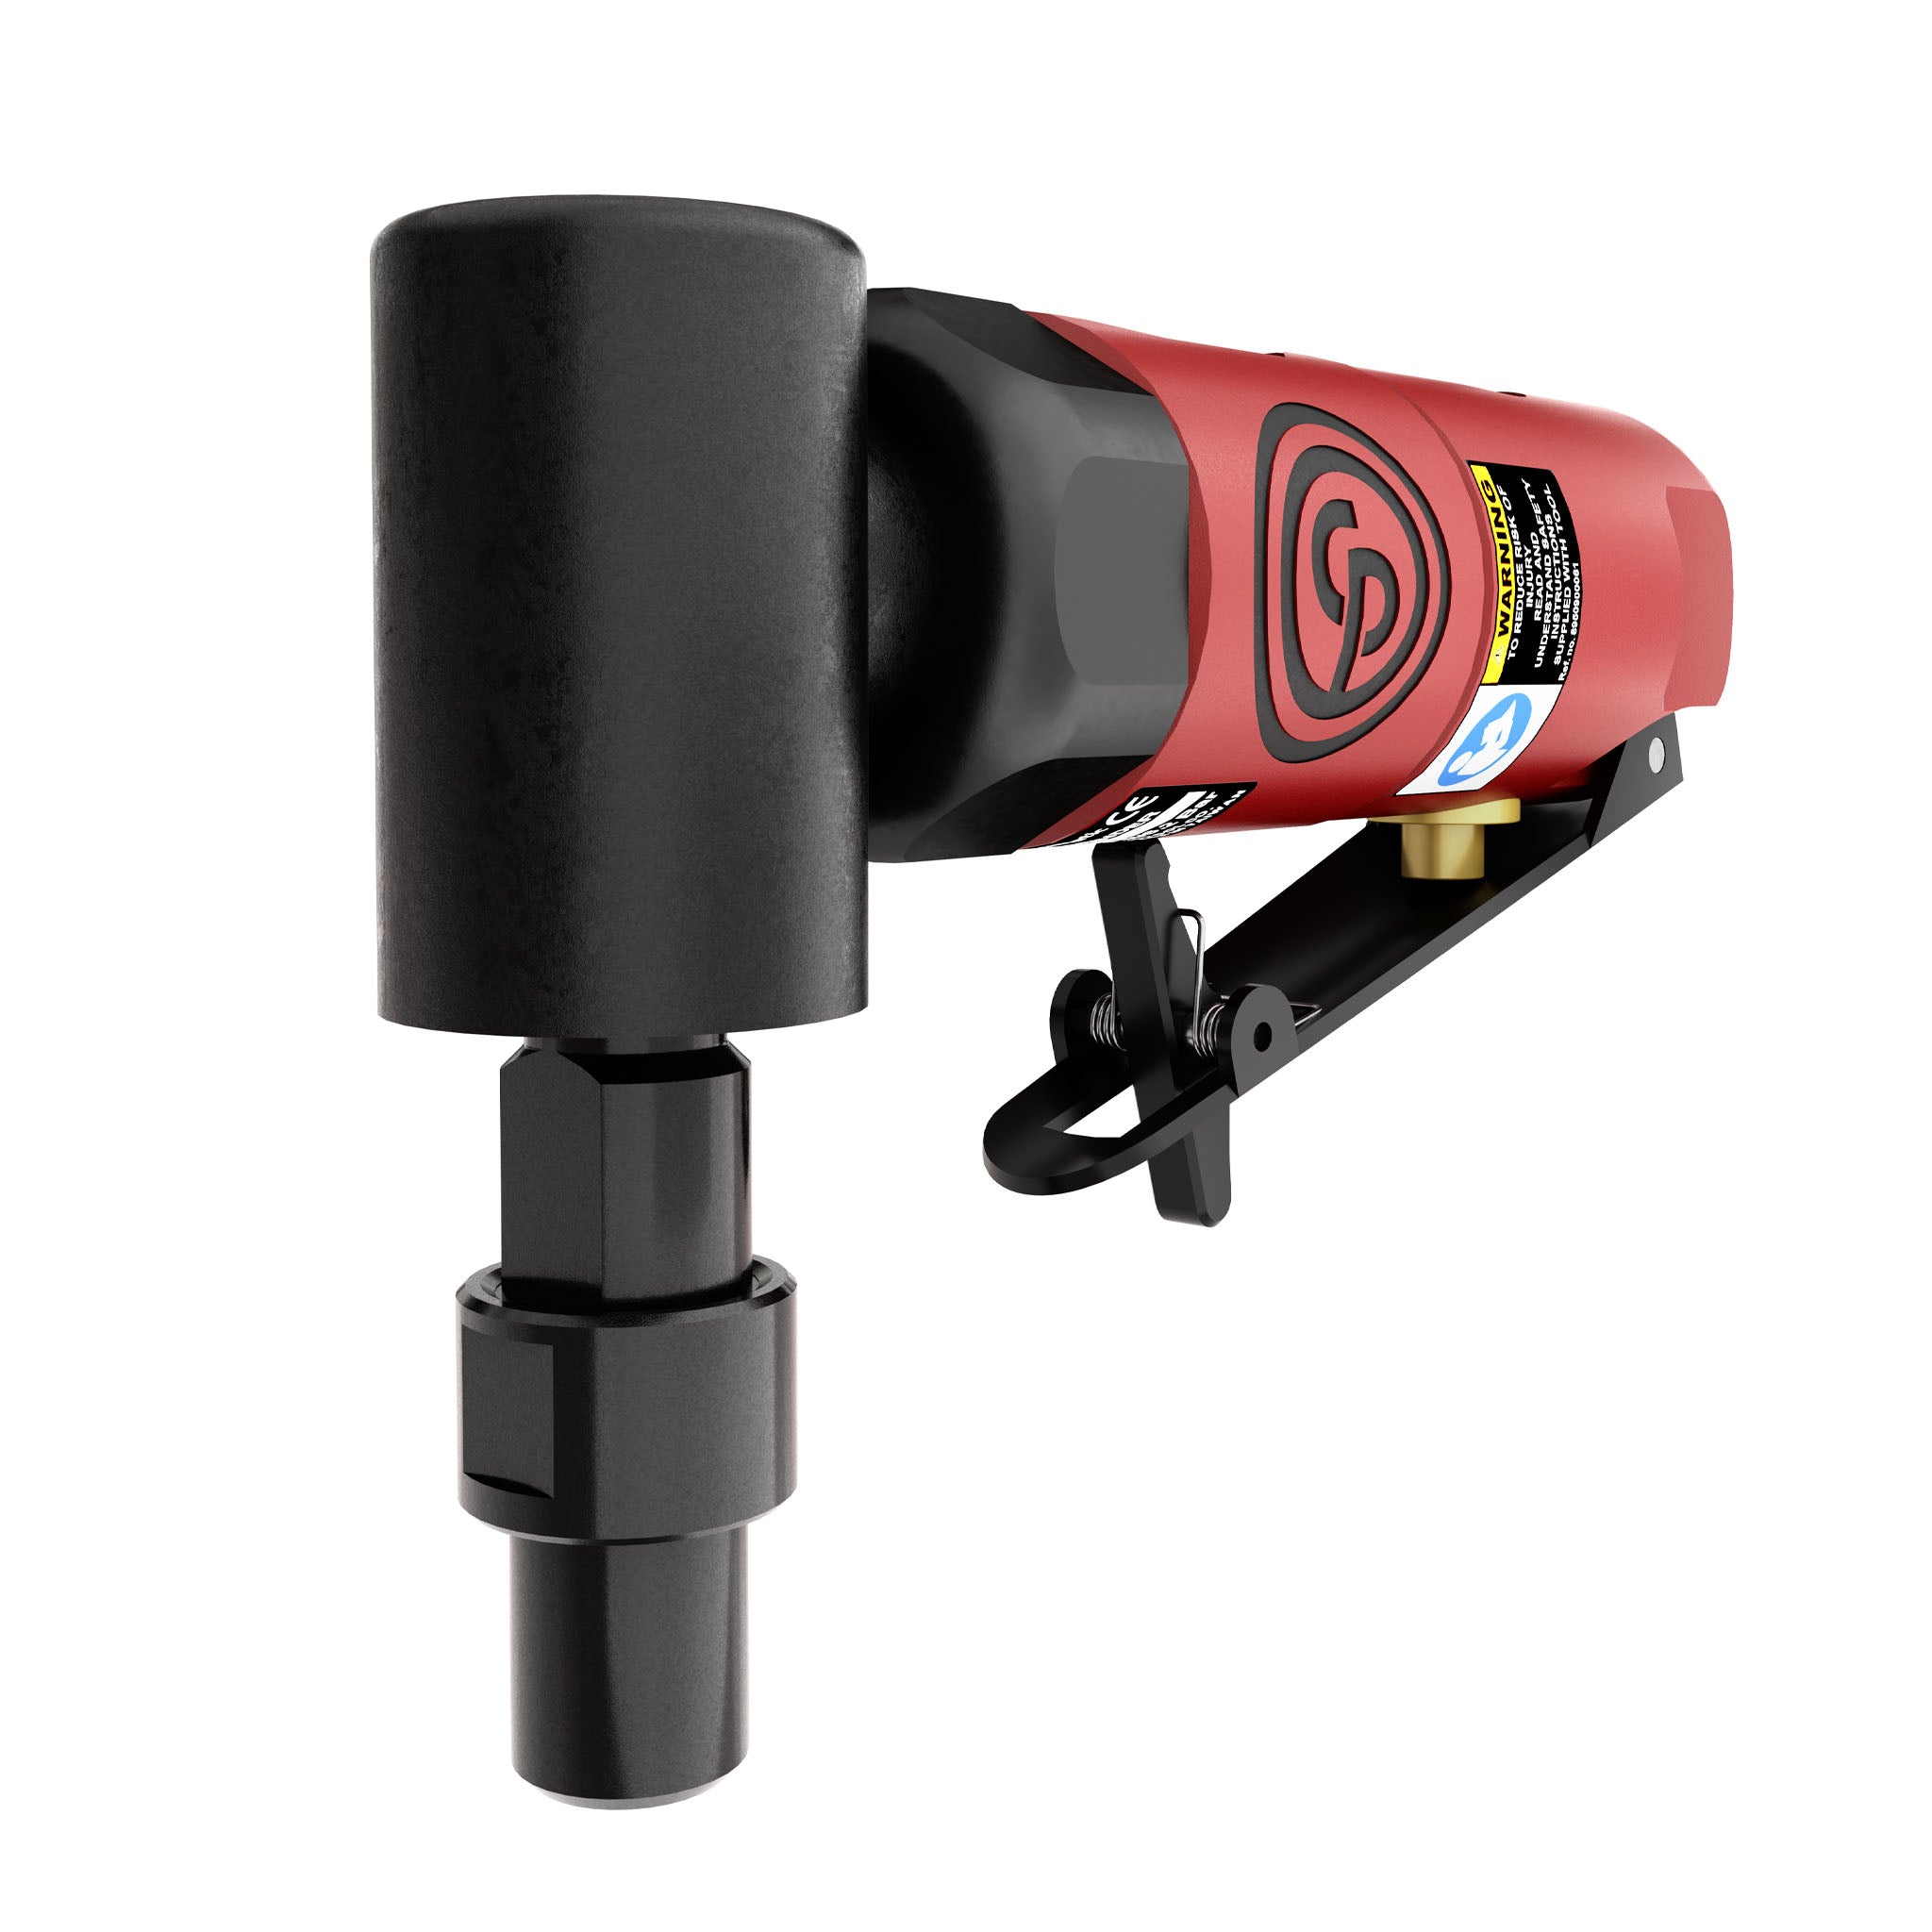 Chicago Pneumatic 1/4" Mini 90 Degree Angle Die Grinder - CP-875